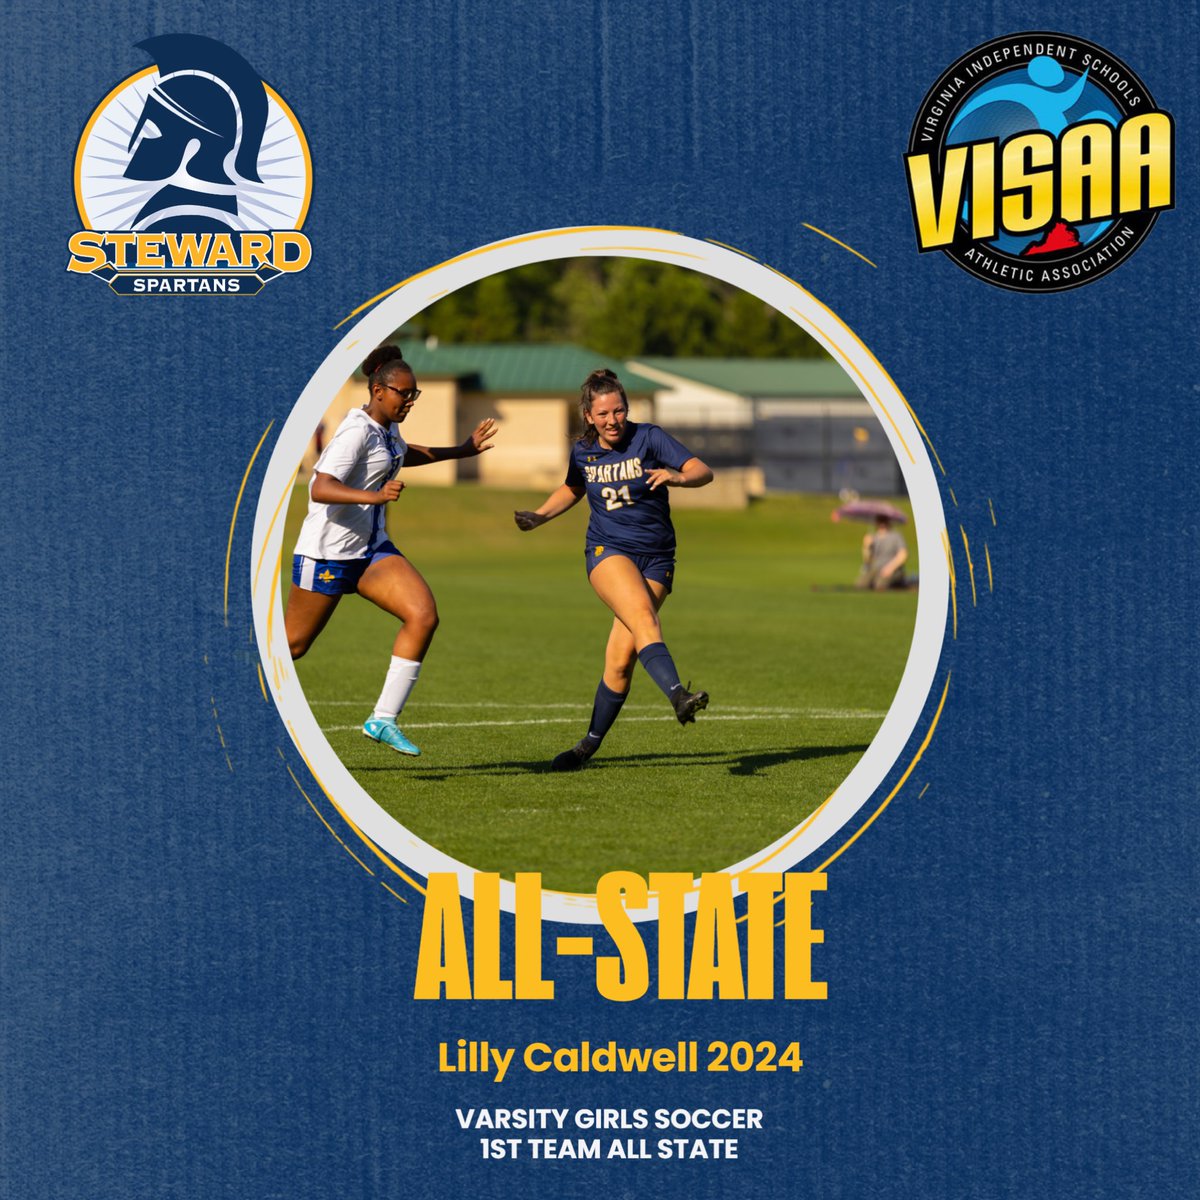 Congratulations to Lilly Caldwell ‘24 for being named VISAA DII 1st Team All State for soccer!! #GoSpartans #rvaW #804varsity @henricosports